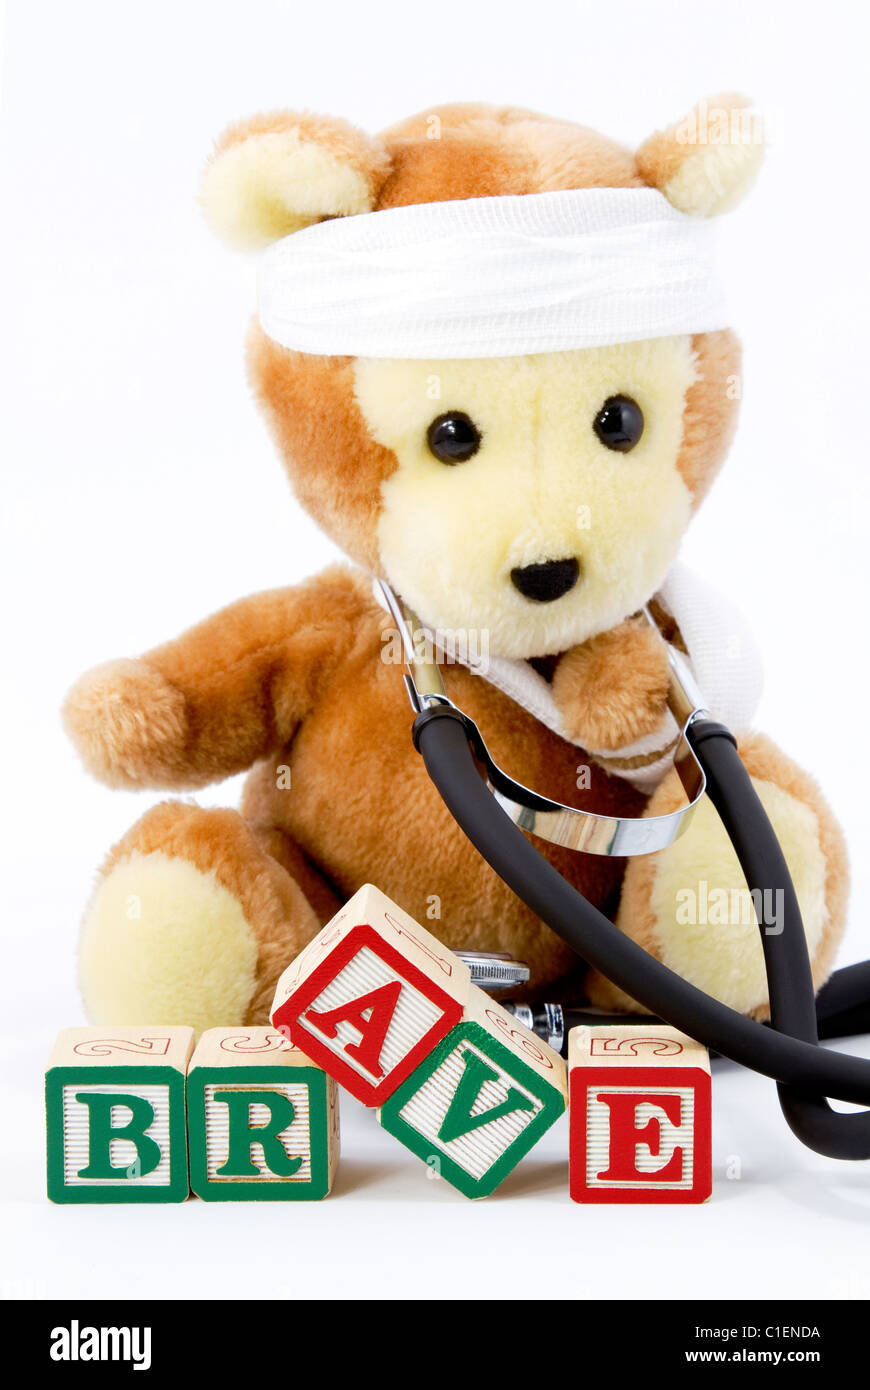 A stuffed bear wears a real stethoscope around its neck and sits behind blocks with BRAVE spelled out. Stock Photo